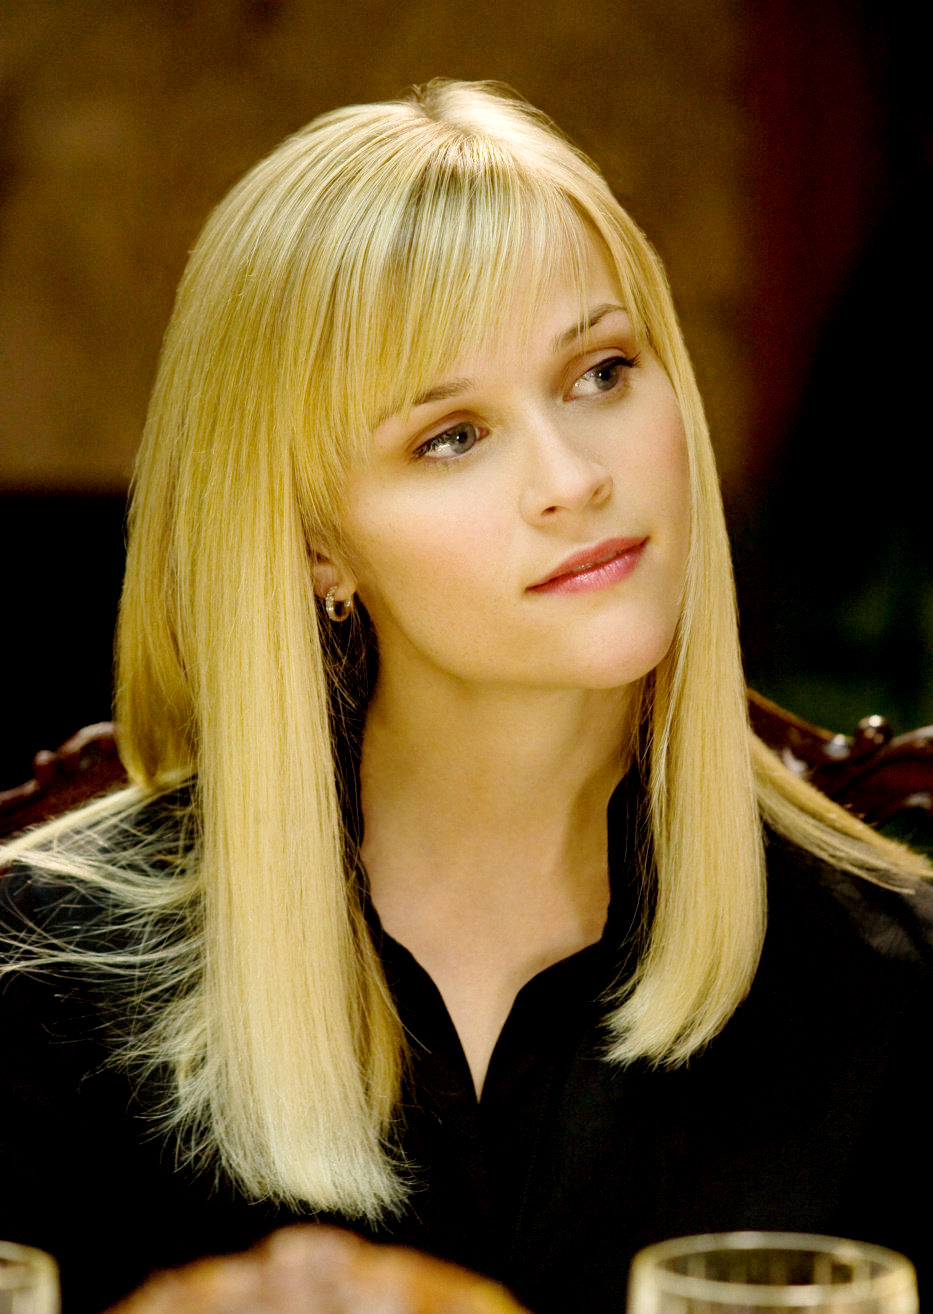 Reese Witherspoon stars as Kate in New Line Cinema's Four Christmases (2008)